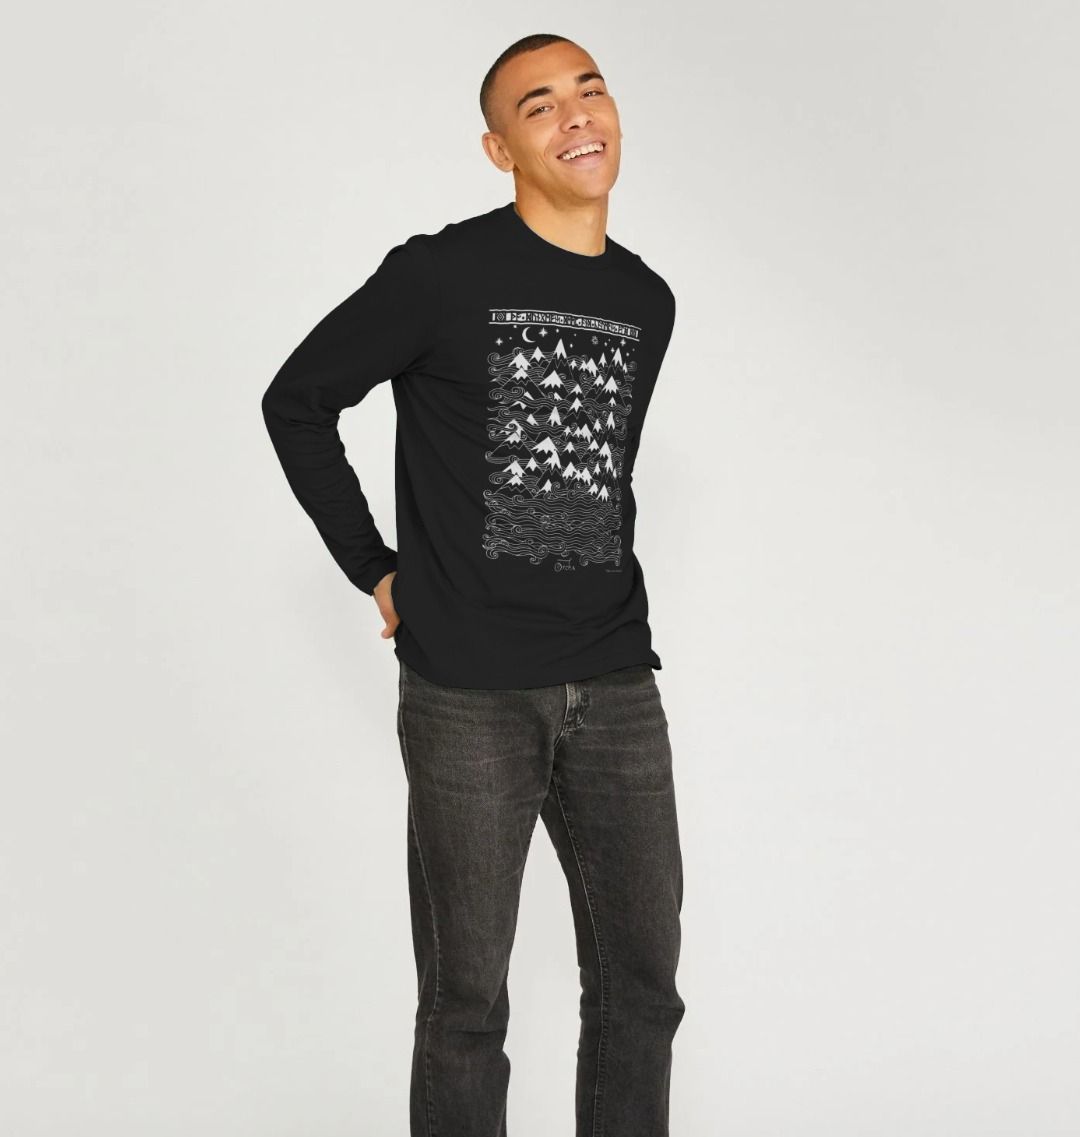 MISTY MOUNTAINS™ Long Sleeved T-Shirt